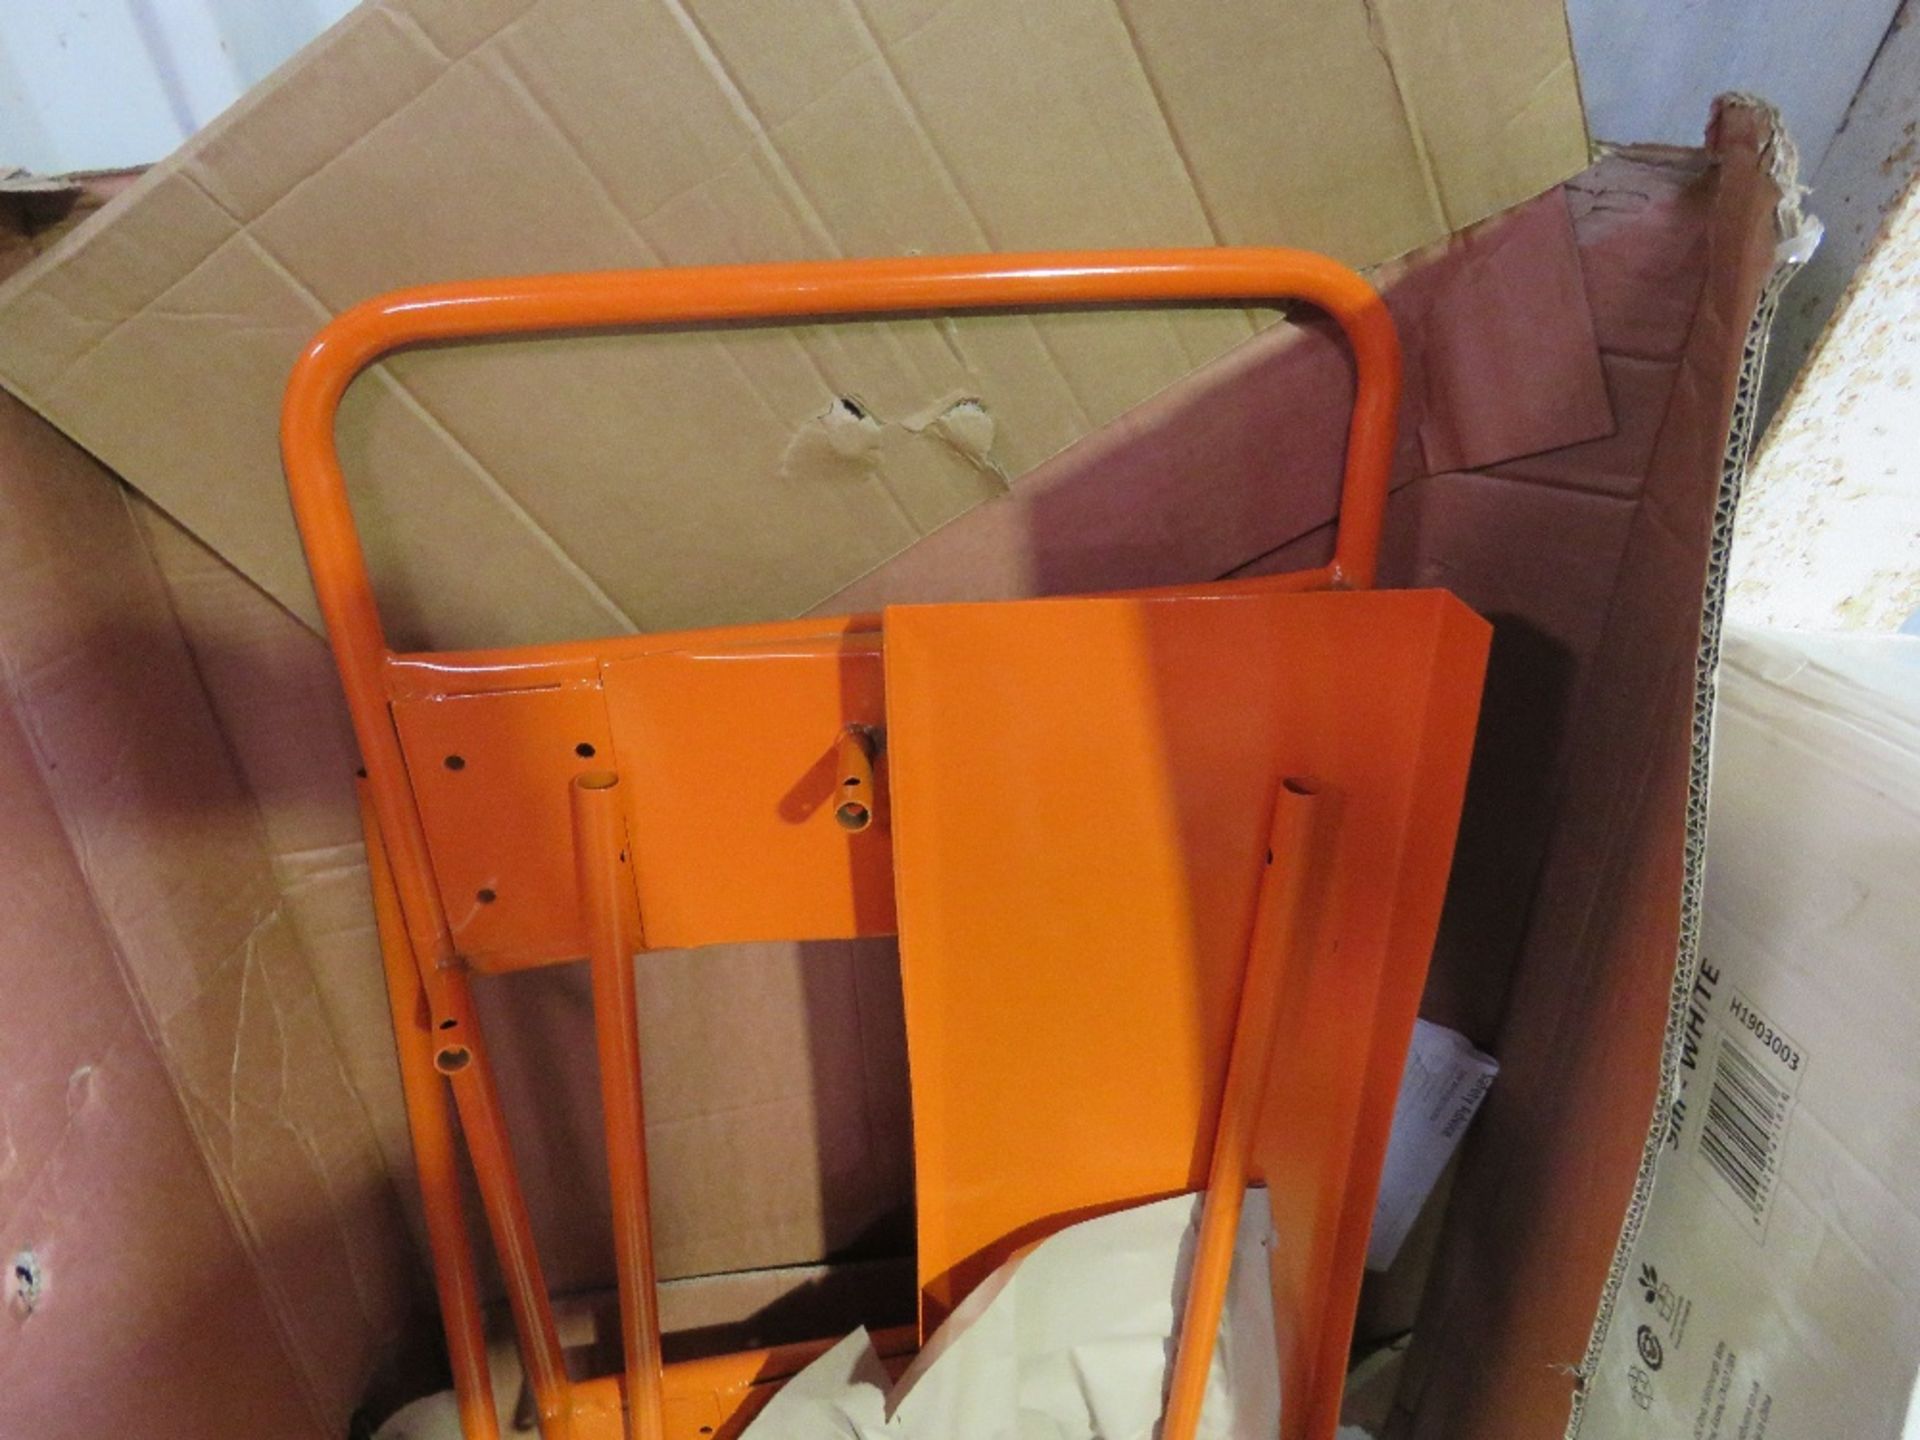 HEAVY DUTY BOARD CARRYING TROLLEY IN A BOX, CONDITION UNKNOWN. - Image 2 of 4